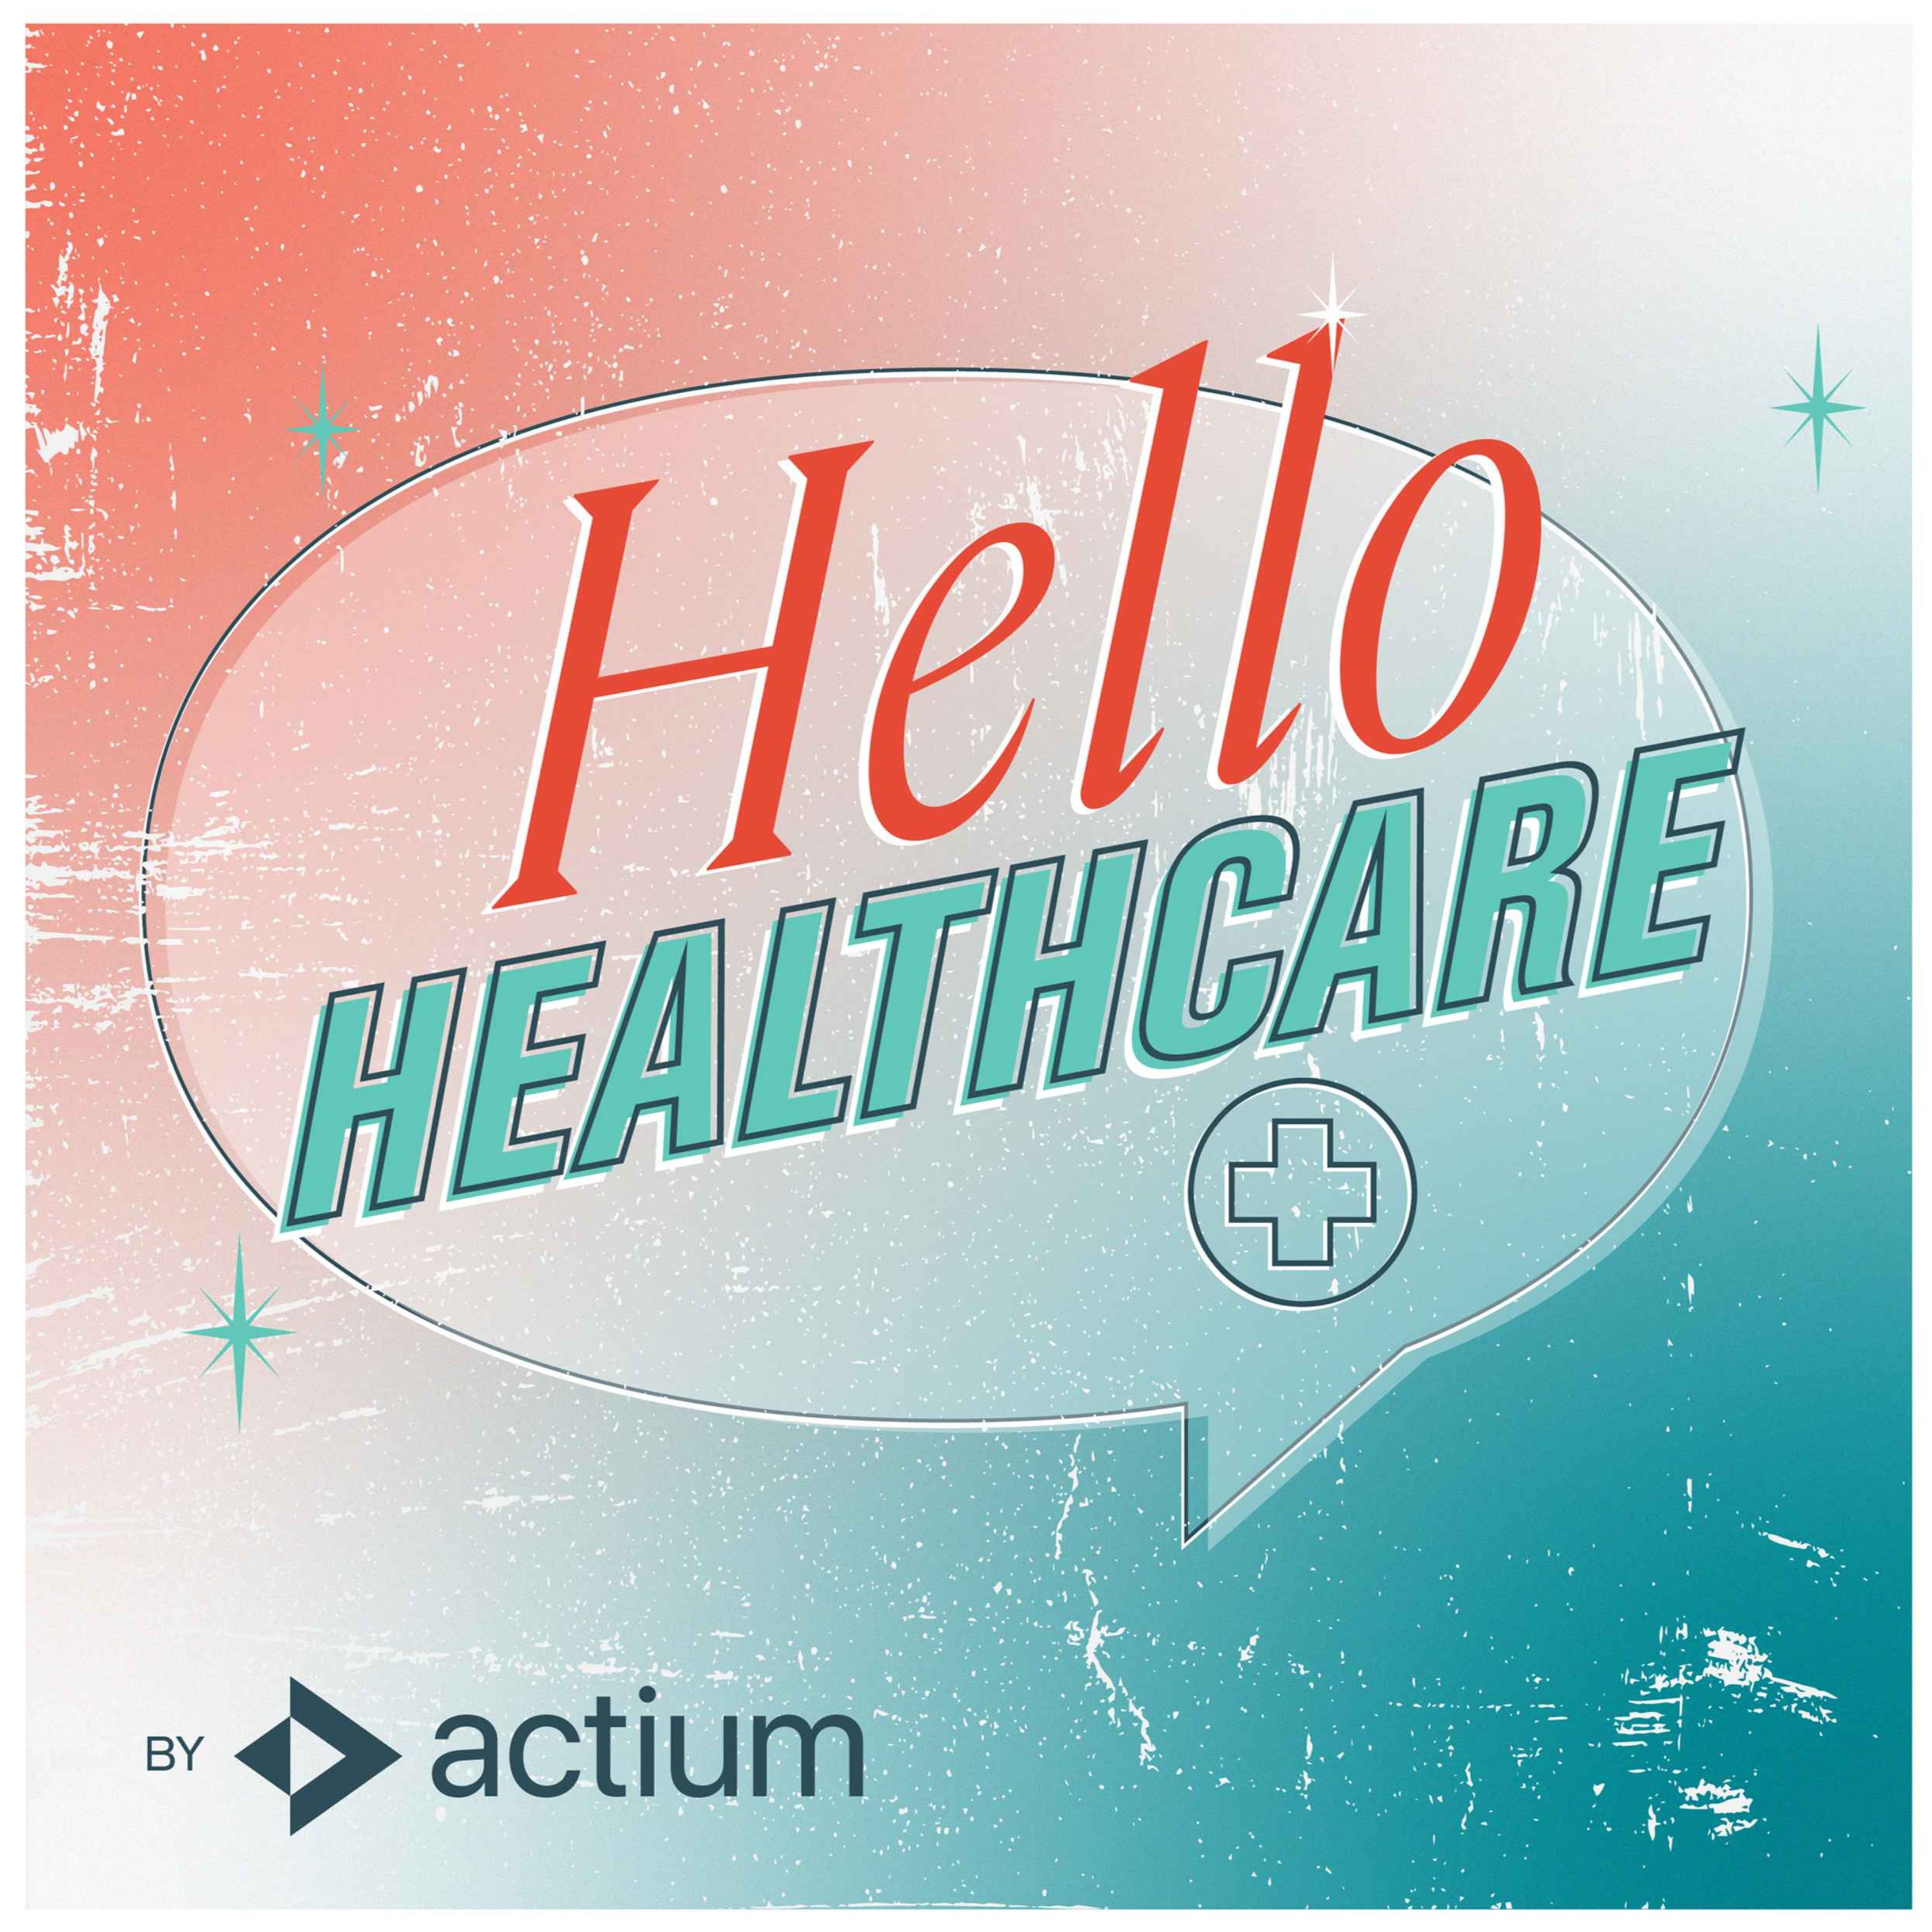 Building a Customer Experience Culture in Healthcare ft. Craig Kartchner